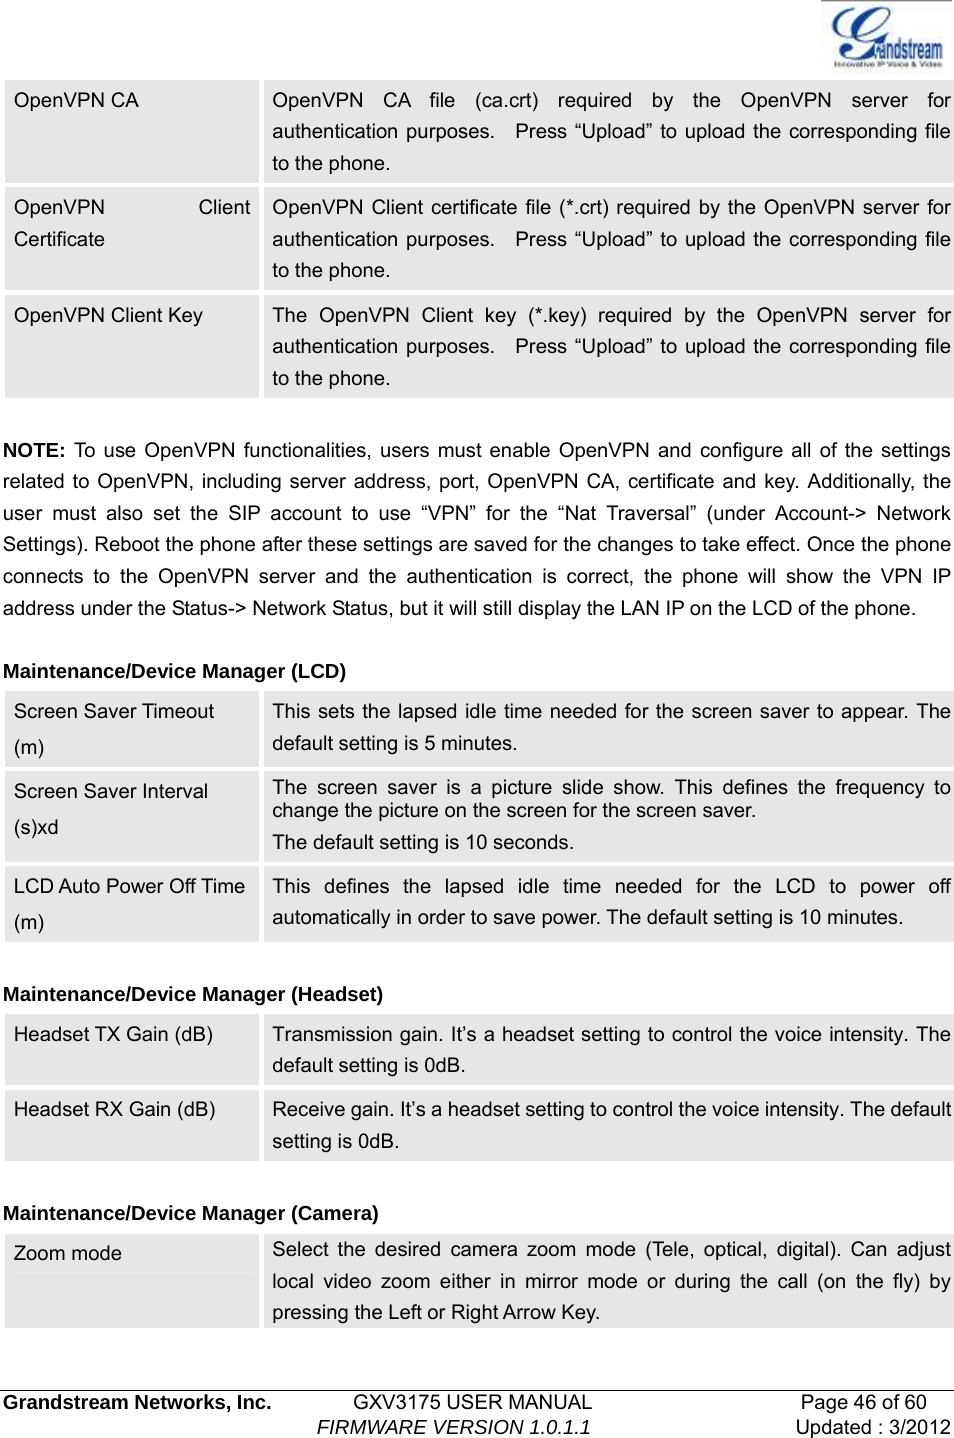   Grandstream Networks, Inc.        GXV3175 USER MANUAL                     Page 46 of 60                                FIRMWARE VERSION 1.0.1.1 Updated : 3/2012  OpenVPN CA  OpenVPN CA file (ca.crt) required by the OpenVPN server for authentication purposes.    Press “Upload” to upload the corresponding file to the phone. OpenVPN Client Certificate  OpenVPN Client certificate file (*.crt) required by the OpenVPN server for authentication purposes.    Press “Upload” to upload the corresponding file to the phone.   OpenVPN Client Key  The OpenVPN Client key (*.key) required by the OpenVPN server for authentication purposes.    Press “Upload” to upload the corresponding file to the phone.  NOTE: To use OpenVPN functionalities, users must enable OpenVPN and configure all of the settings related to OpenVPN, including server address, port, OpenVPN CA, certificate and key. Additionally, the user must also set the SIP account to use “VPN” for the “Nat Traversal” (under Account-&gt; Network Settings). Reboot the phone after these settings are saved for the changes to take effect. Once the phone connects to the OpenVPN server and the authentication is correct, the phone will show the VPN IP address under the Status-&gt; Network Status, but it will still display the LAN IP on the LCD of the phone.  Maintenance/Device Manager (LCD) Screen Saver Timeout (m) This sets the lapsed idle time needed for the screen saver to appear. The default setting is 5 minutes. Screen Saver Interval (s)xd The screen saver is a picture slide show. This defines the frequency to change the picture on the screen for the screen saver.   The default setting is 10 seconds. LCD Auto Power Off Time (m) This defines the lapsed idle time needed for the LCD to power off automatically in order to save power. The default setting is 10 minutes.  Maintenance/Device Manager (Headset) Headset TX Gain (dB)  Transmission gain. It’s a headset setting to control the voice intensity. The default setting is 0dB. Headset RX Gain (dB)  Receive gain. It’s a headset setting to control the voice intensity. The default setting is 0dB.  Maintenance/Device Manager (Camera) Zoom mode  Select the desired camera zoom mode (Tele, optical, digital). Can adjust local video zoom either in mirror mode or during the call (on the fly) by pressing the Left or Right Arrow Key. 